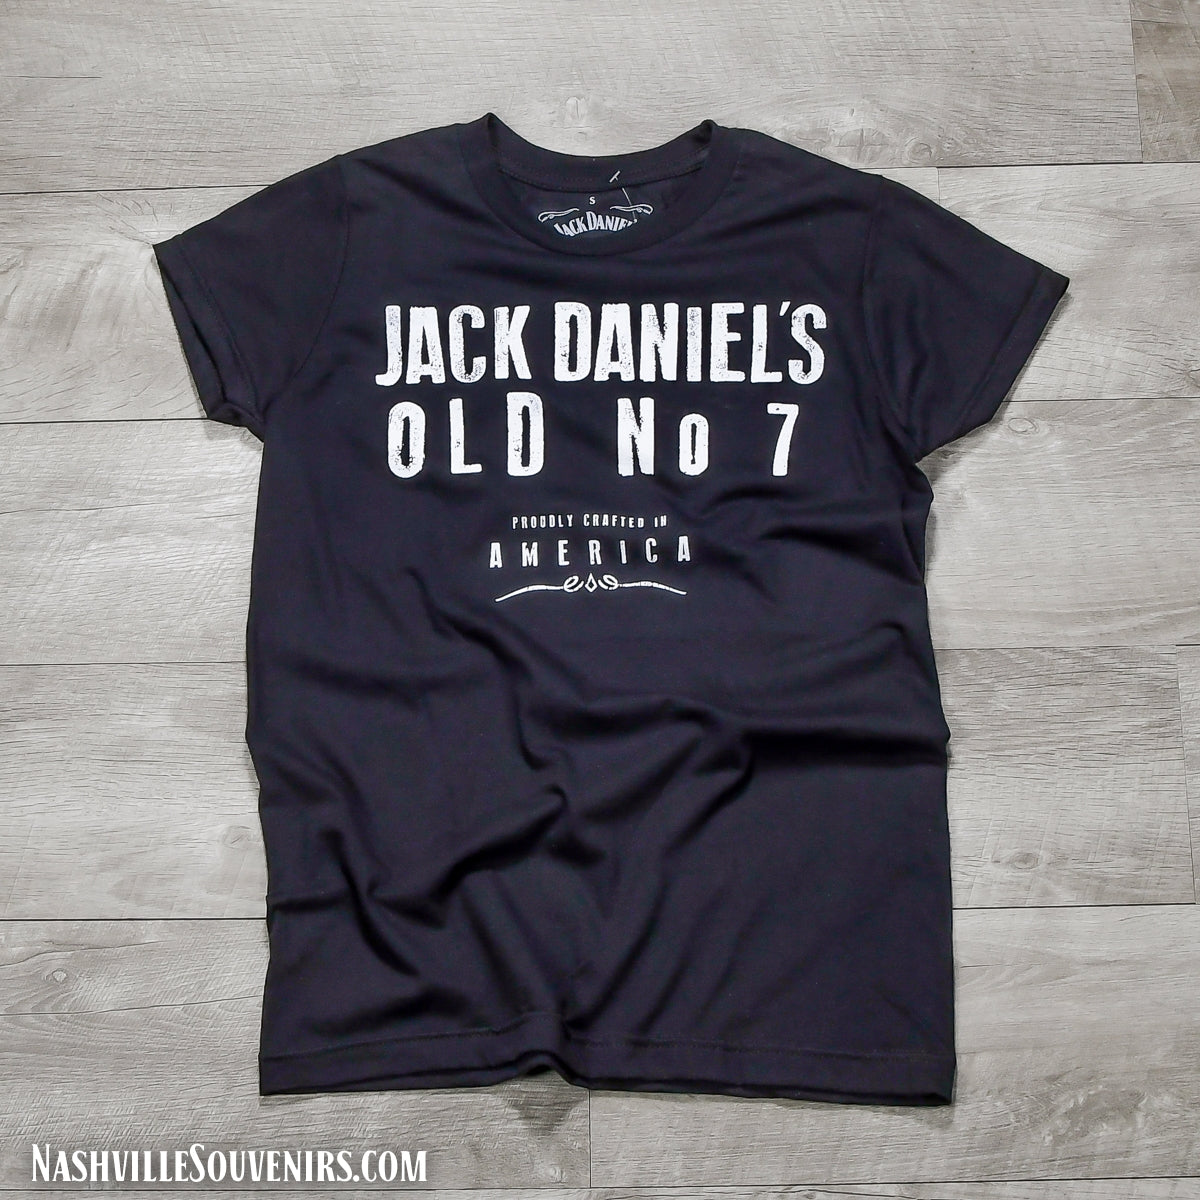 Officially licensed Jack Daniels Women's Old No 7 Distressed Font T-Shirt in black. Get yours today with FREE SHIPPING on all US orders over $75!